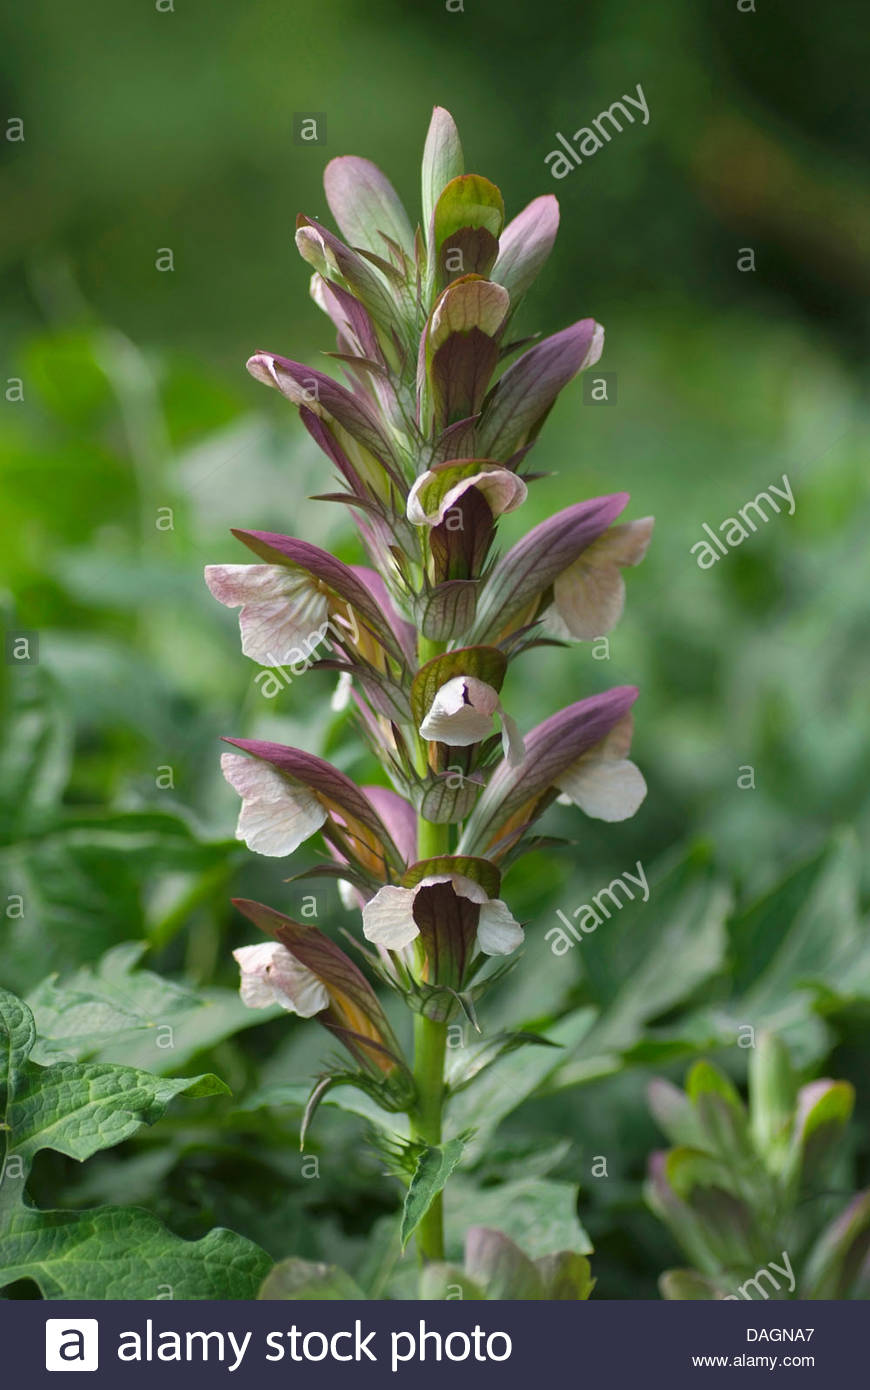 Acanthus Flower Stock Photos & Acanthus Flower Stock Images.